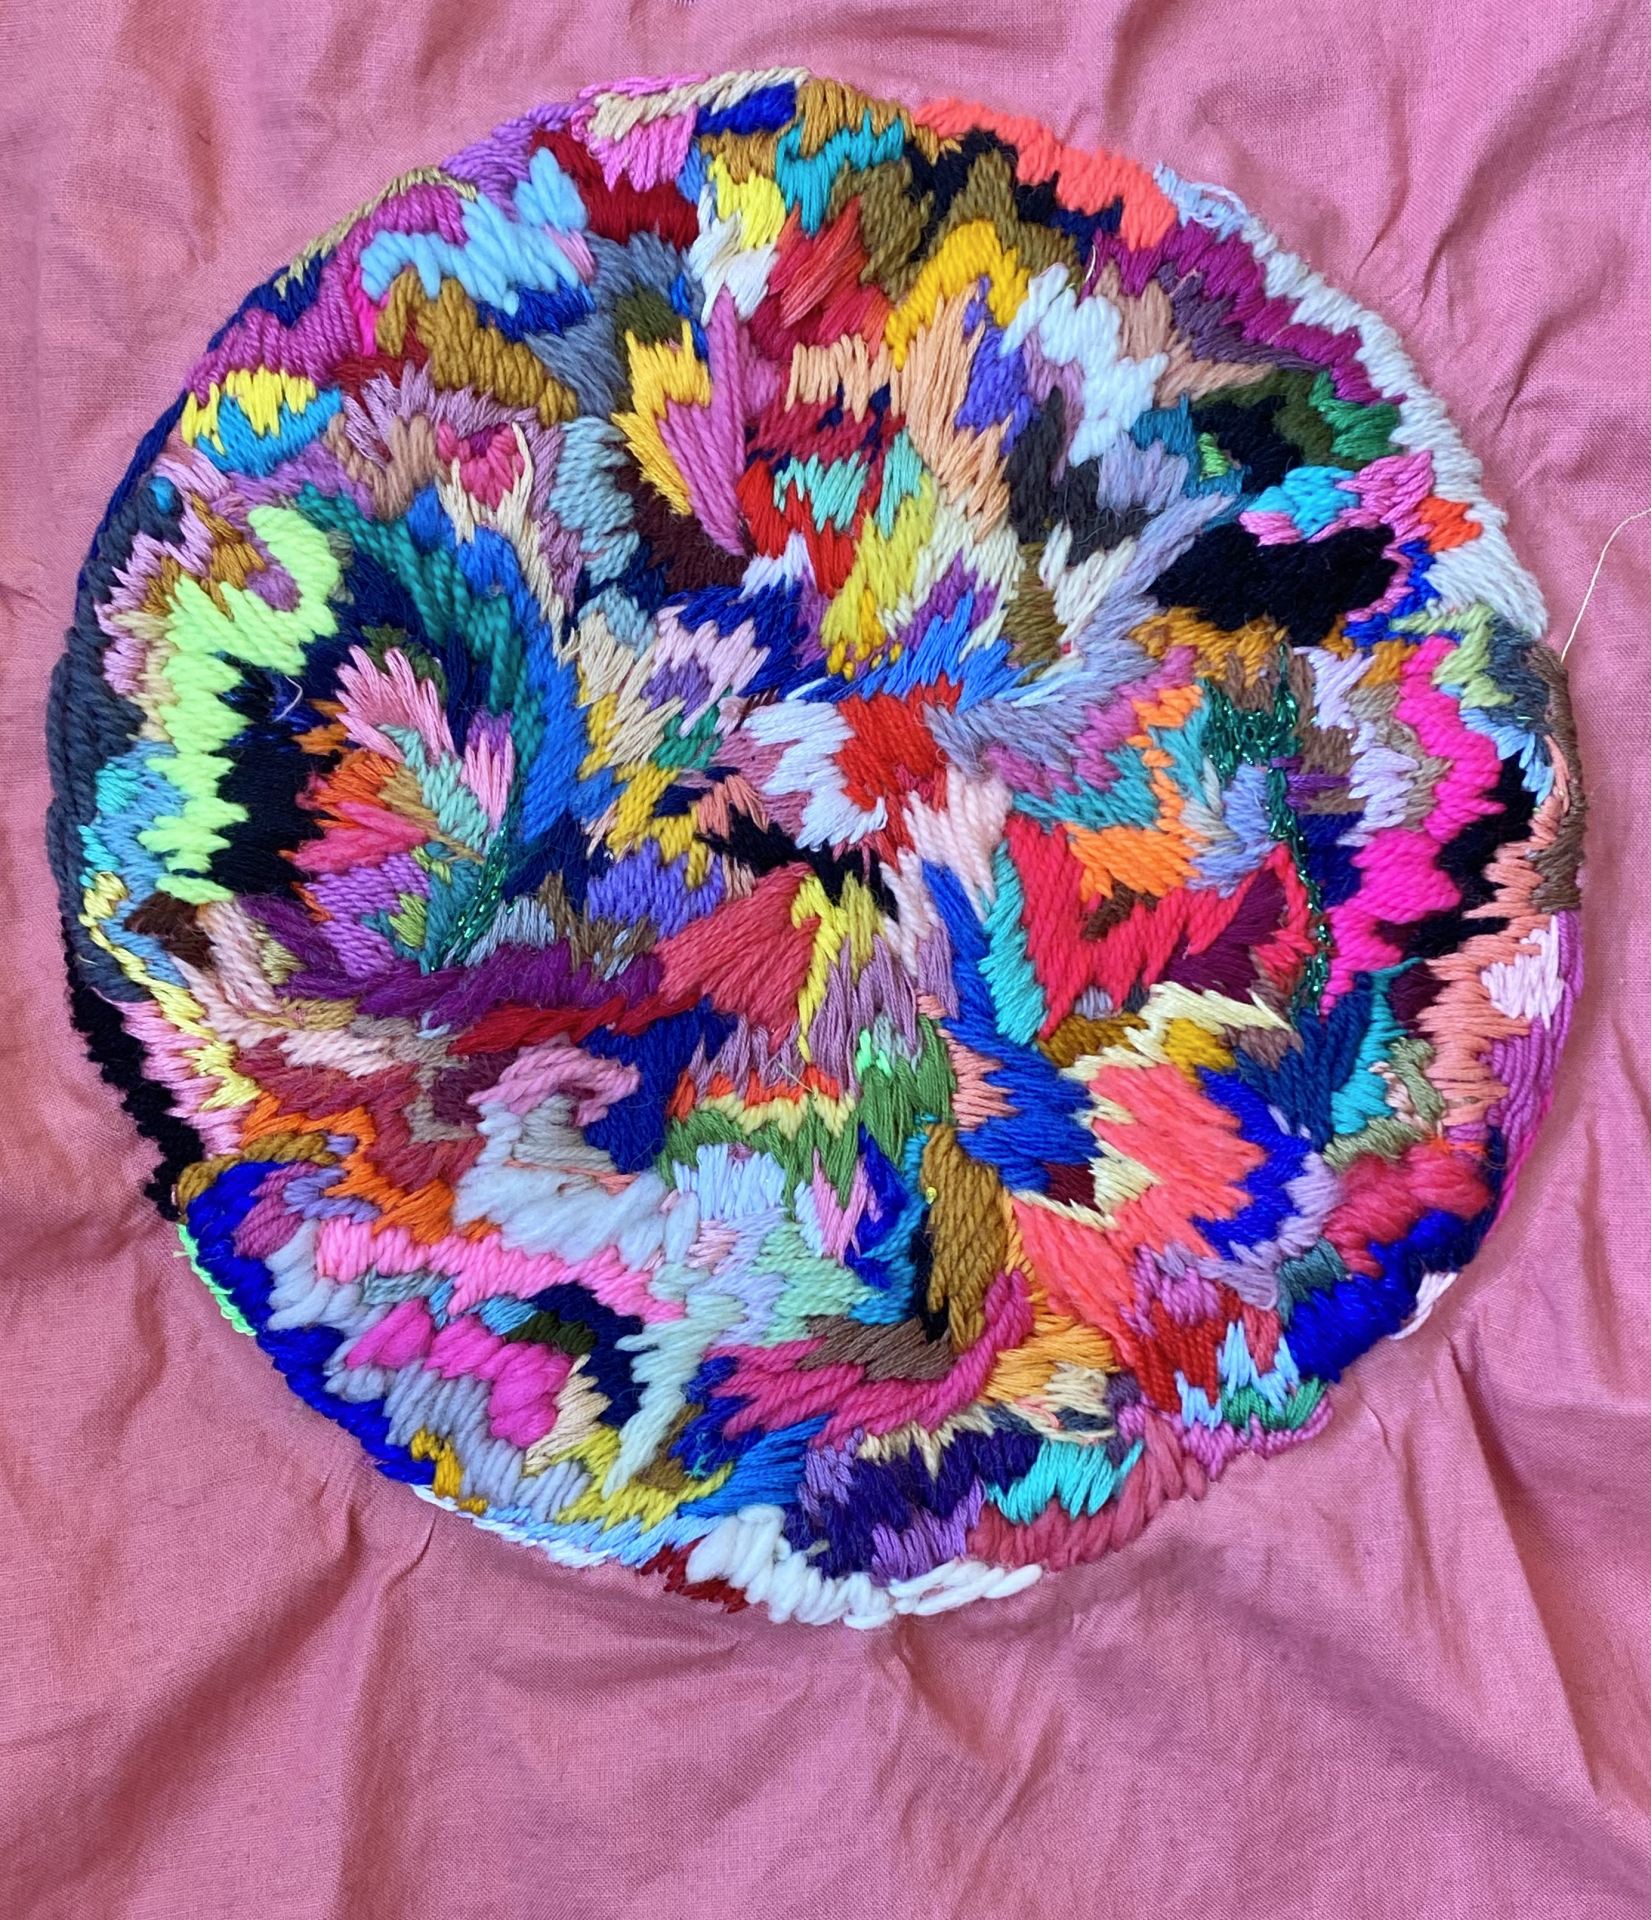 An image of a circle embroidered using many colours.